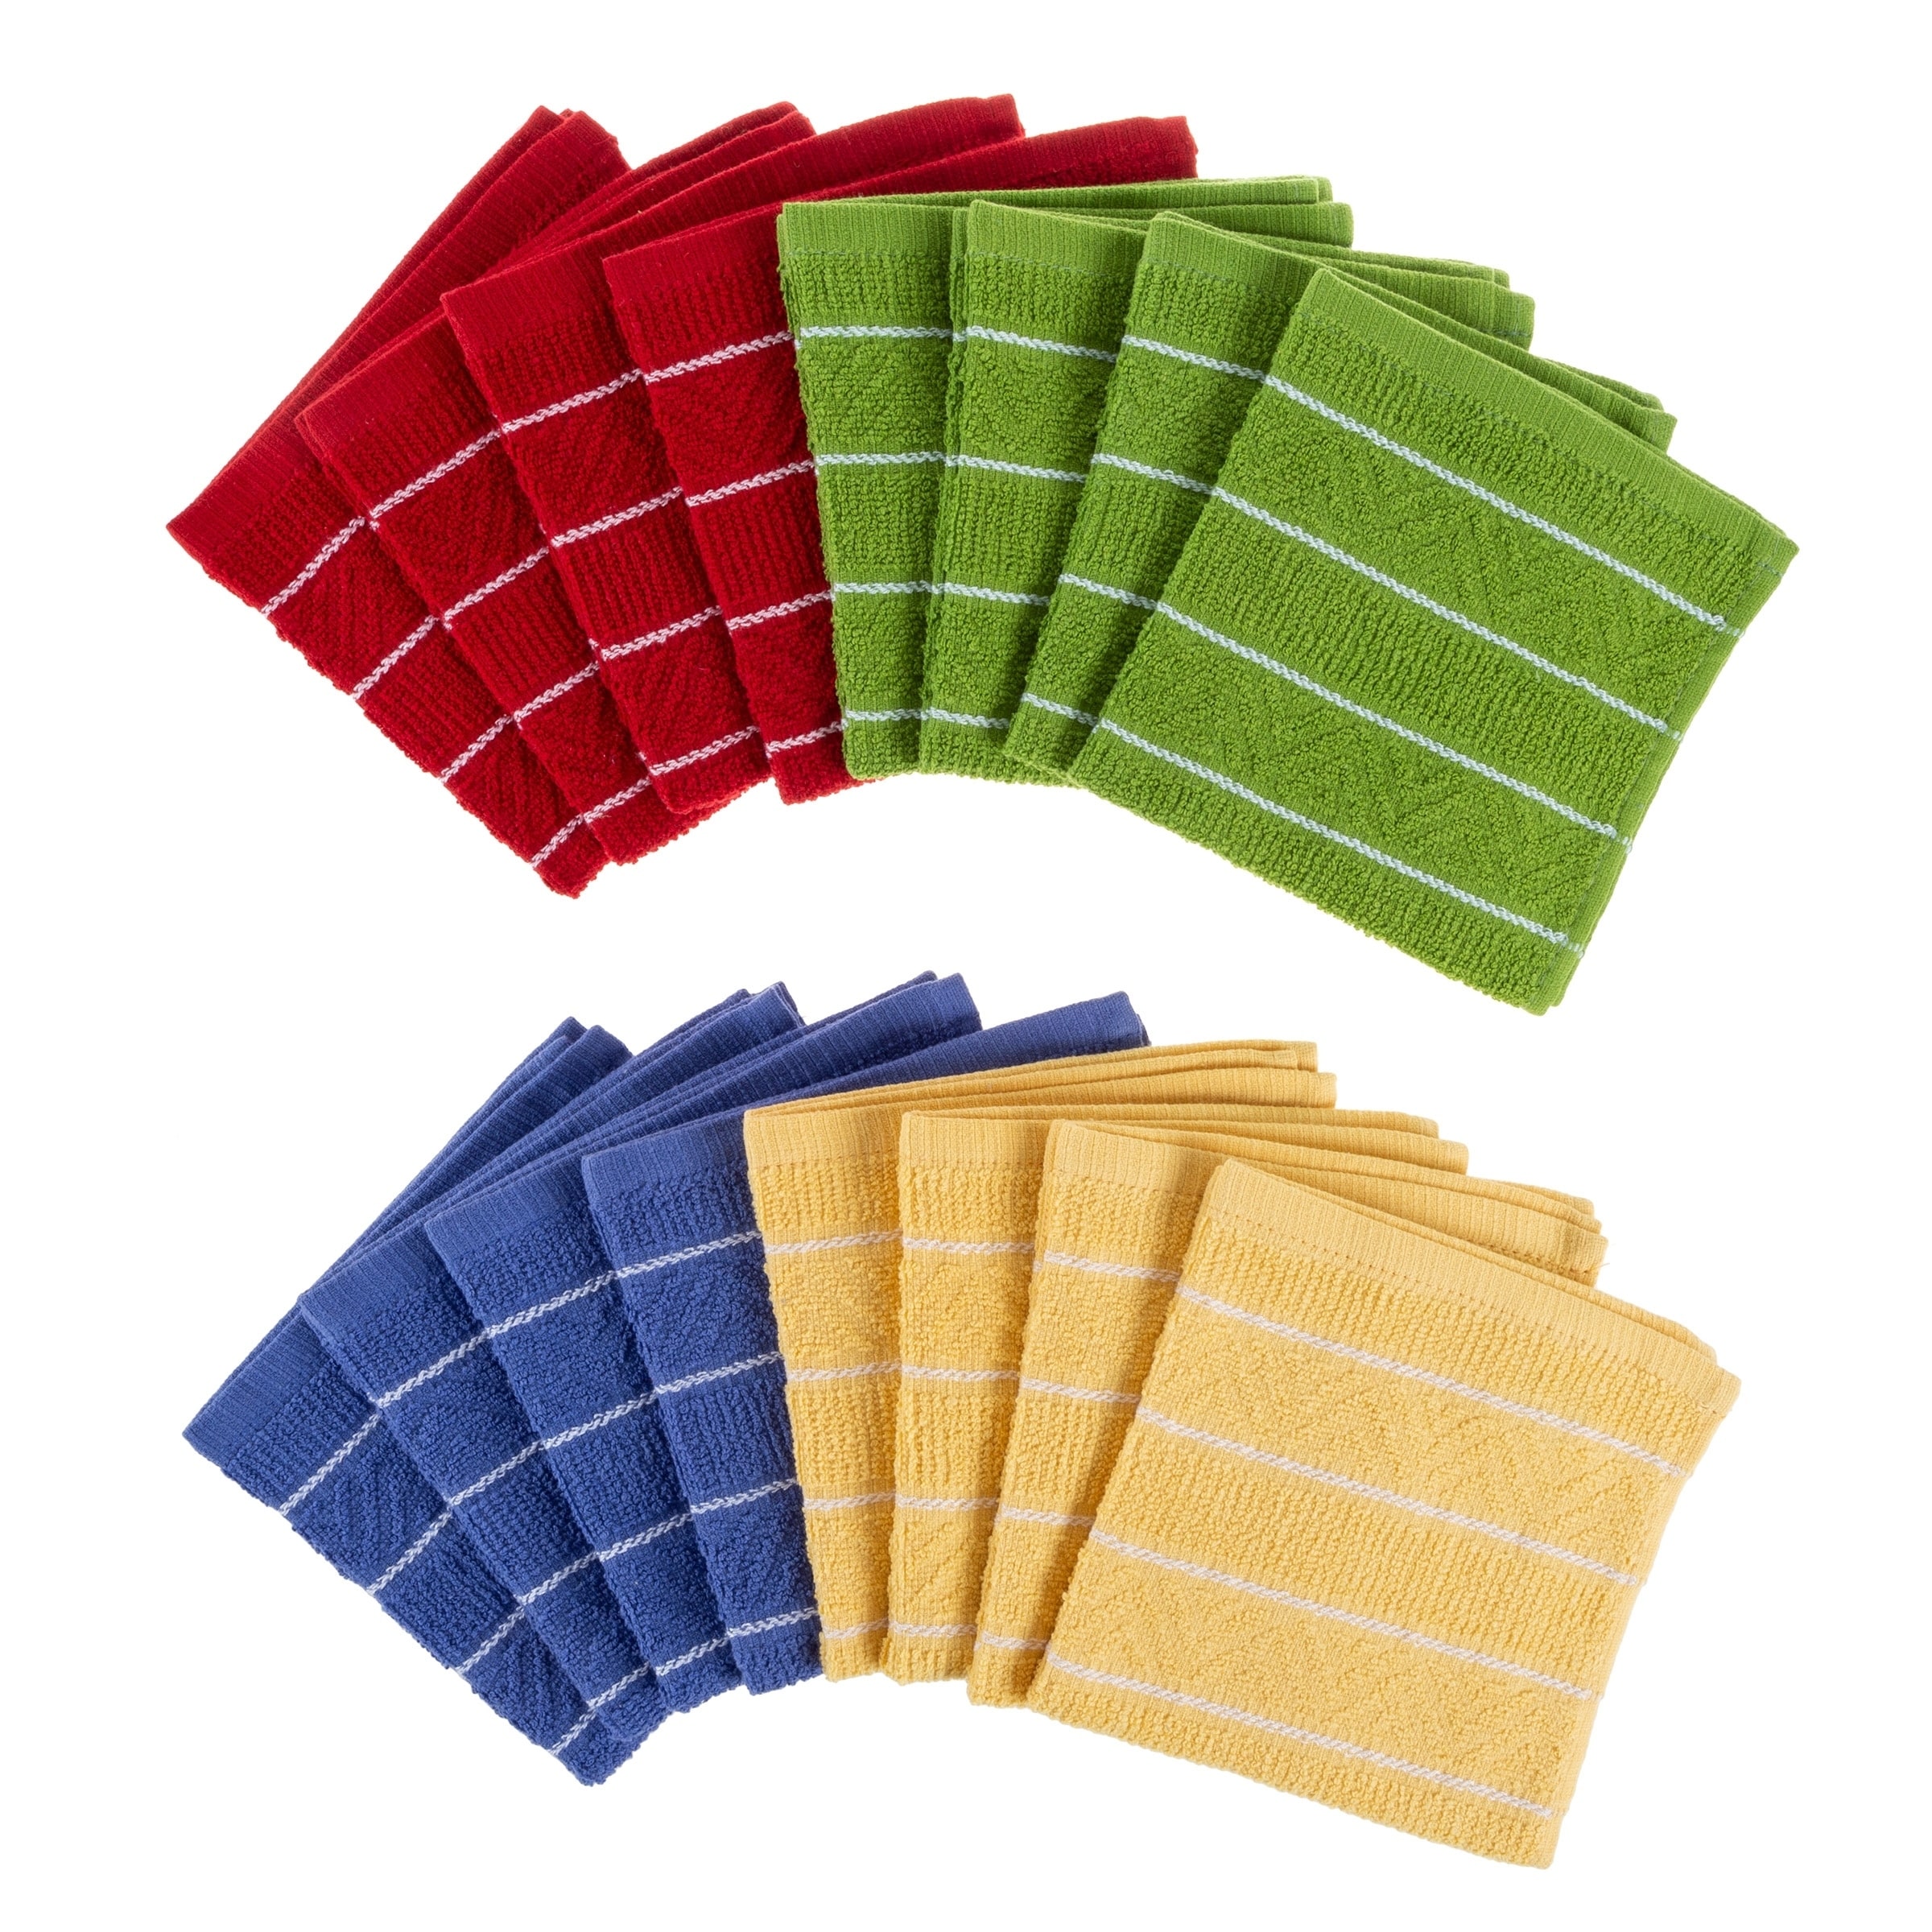 Kitchen Dish Cloth-Set of 16- 12.5x12.5 in -100% Cotton Wash Cloths by  Windsor Home - 12.5 x 12.5 - On Sale - Bed Bath & Beyond - 29905958